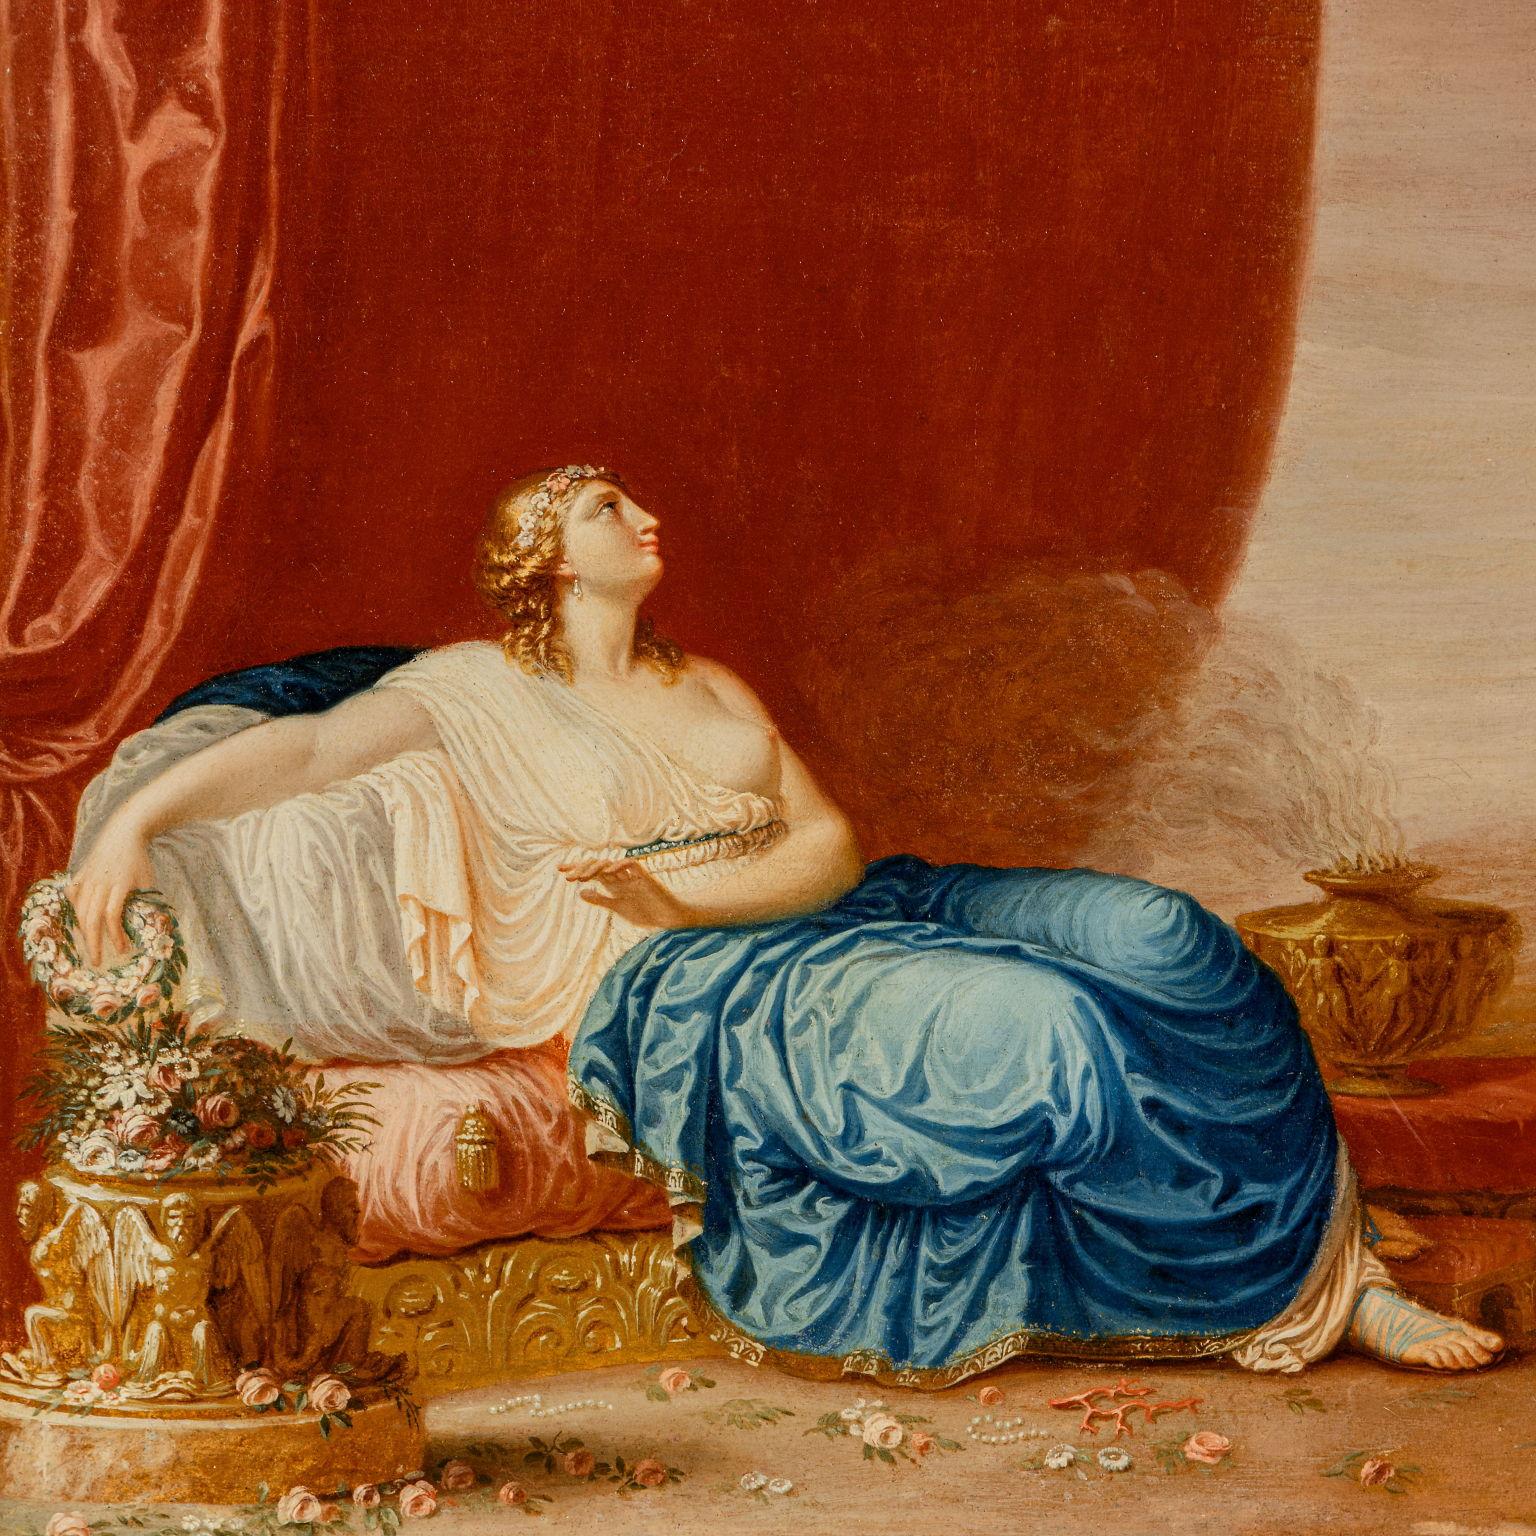 From the lost fresco with the allegory of Asia (De la fresque de l'Asie) by Andrea Appiani, XIXe siècle - Painting de Unknown